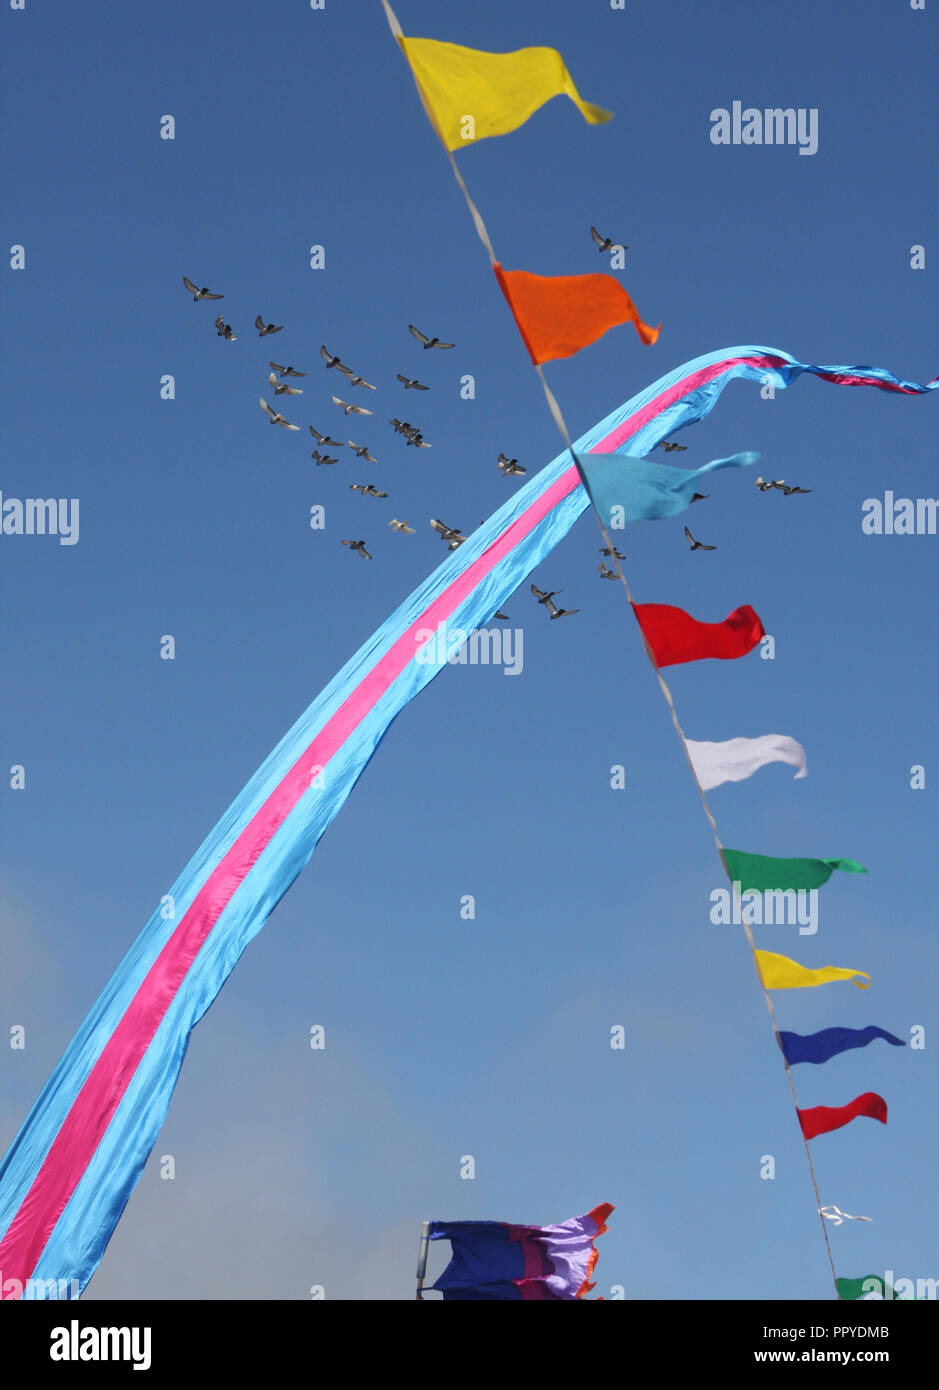 coloured flags fluttering on sunny dat with flock of birds Stock Photo